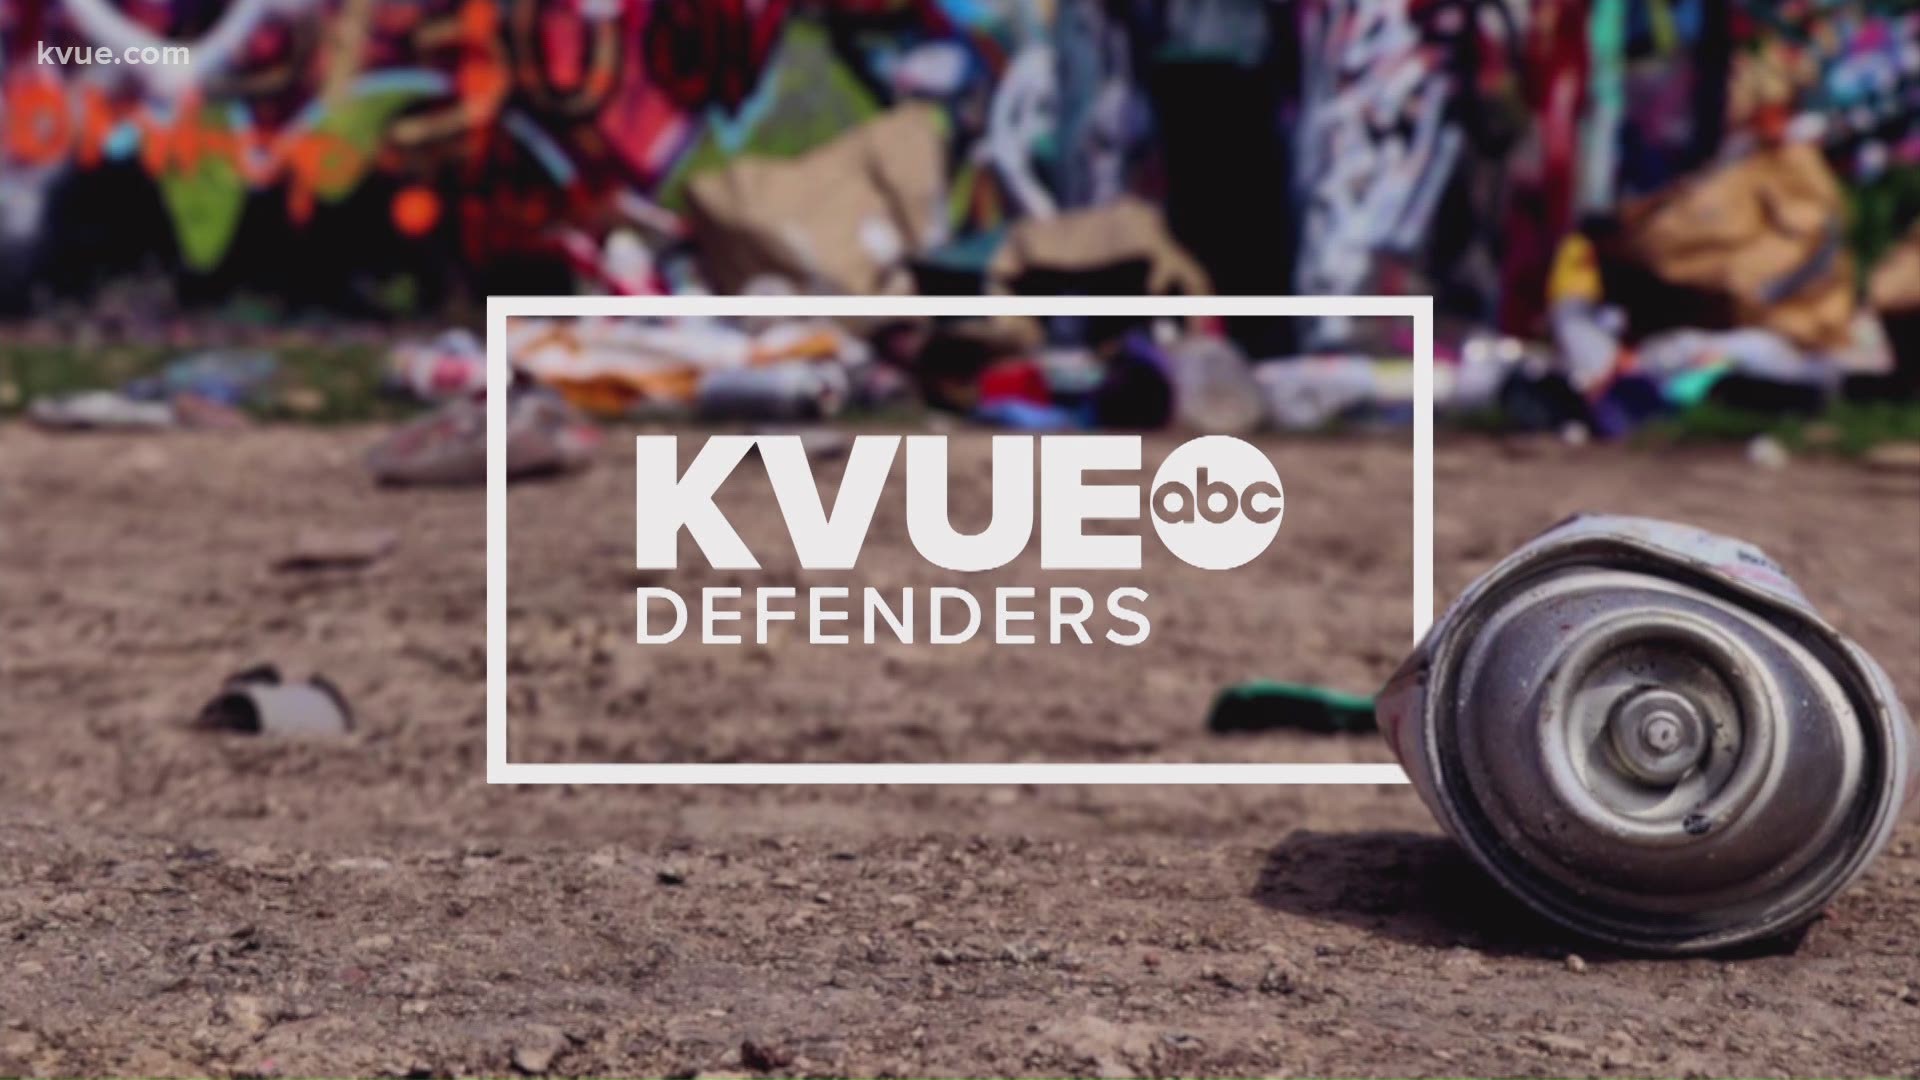 The KVUE Defenders are continuing to answer your election questions. If you have a question, text 512-459-9442.